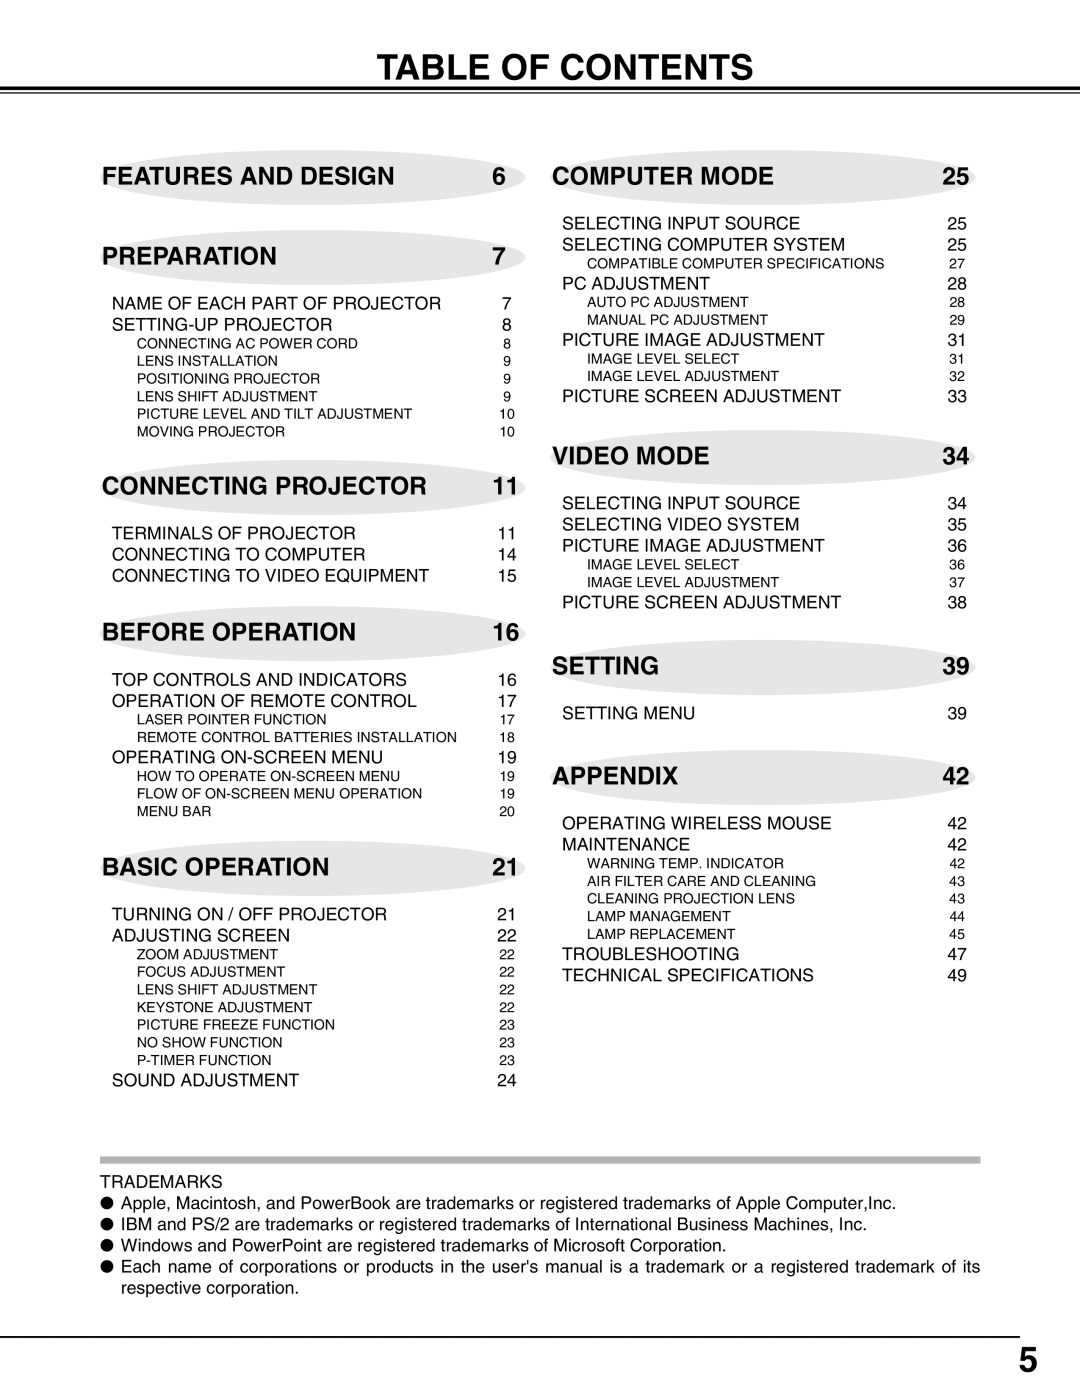 Christie Digital Systems 38-MX2001-01 Table Of Contents, Features And Design, Computer Mode, Preparation, Video Mode 